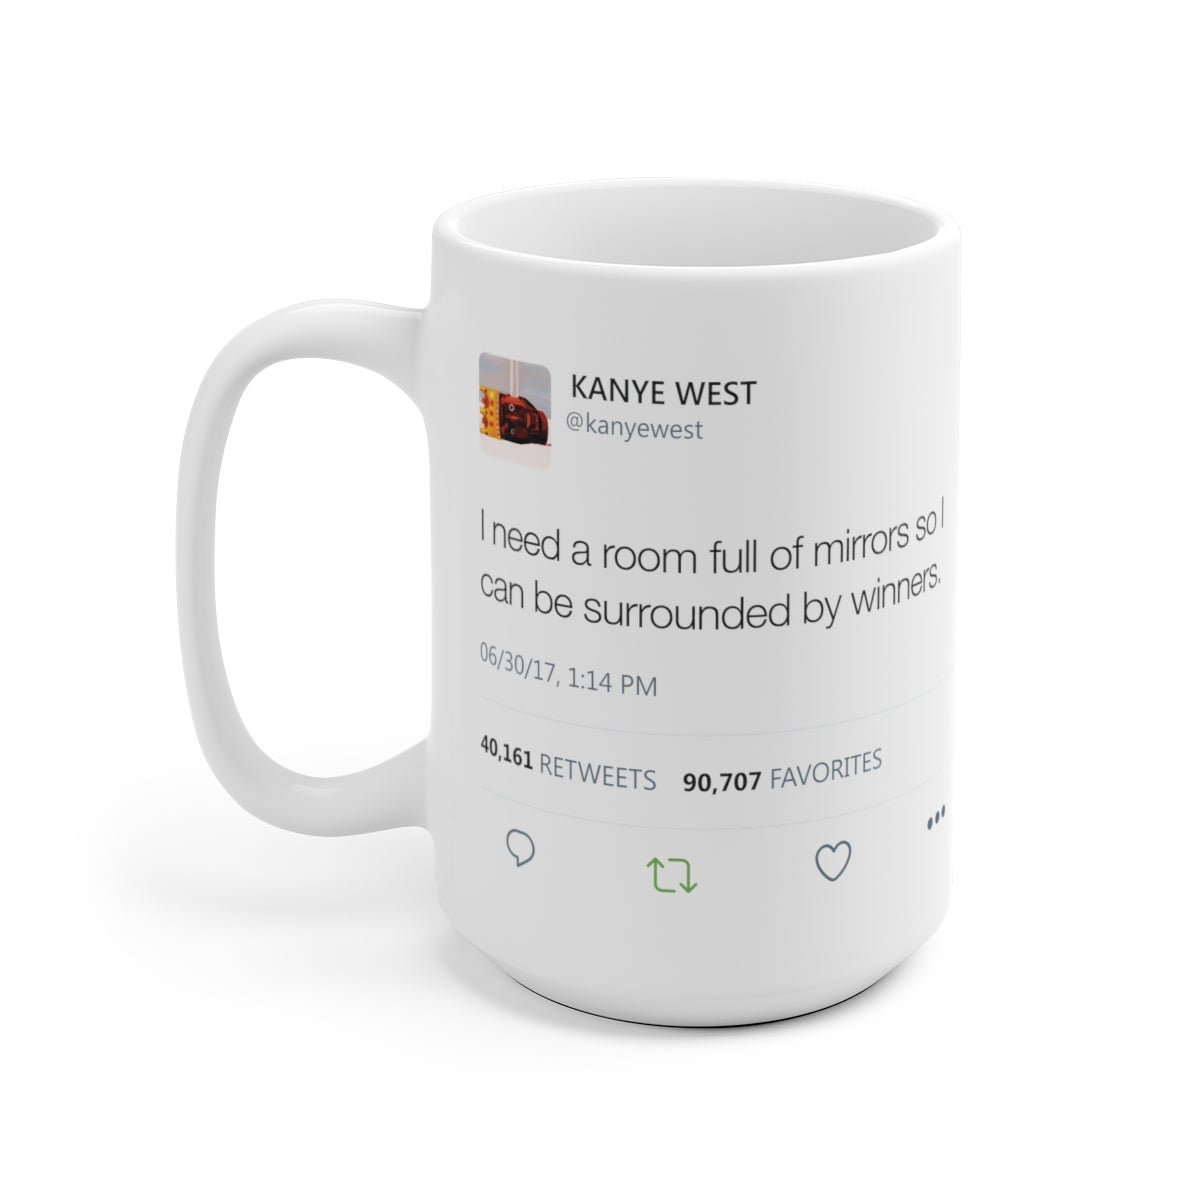 I need a room full of mirrors so I can be surrounded by winners - Kanye West Mug Tweet-15oz-Archethype